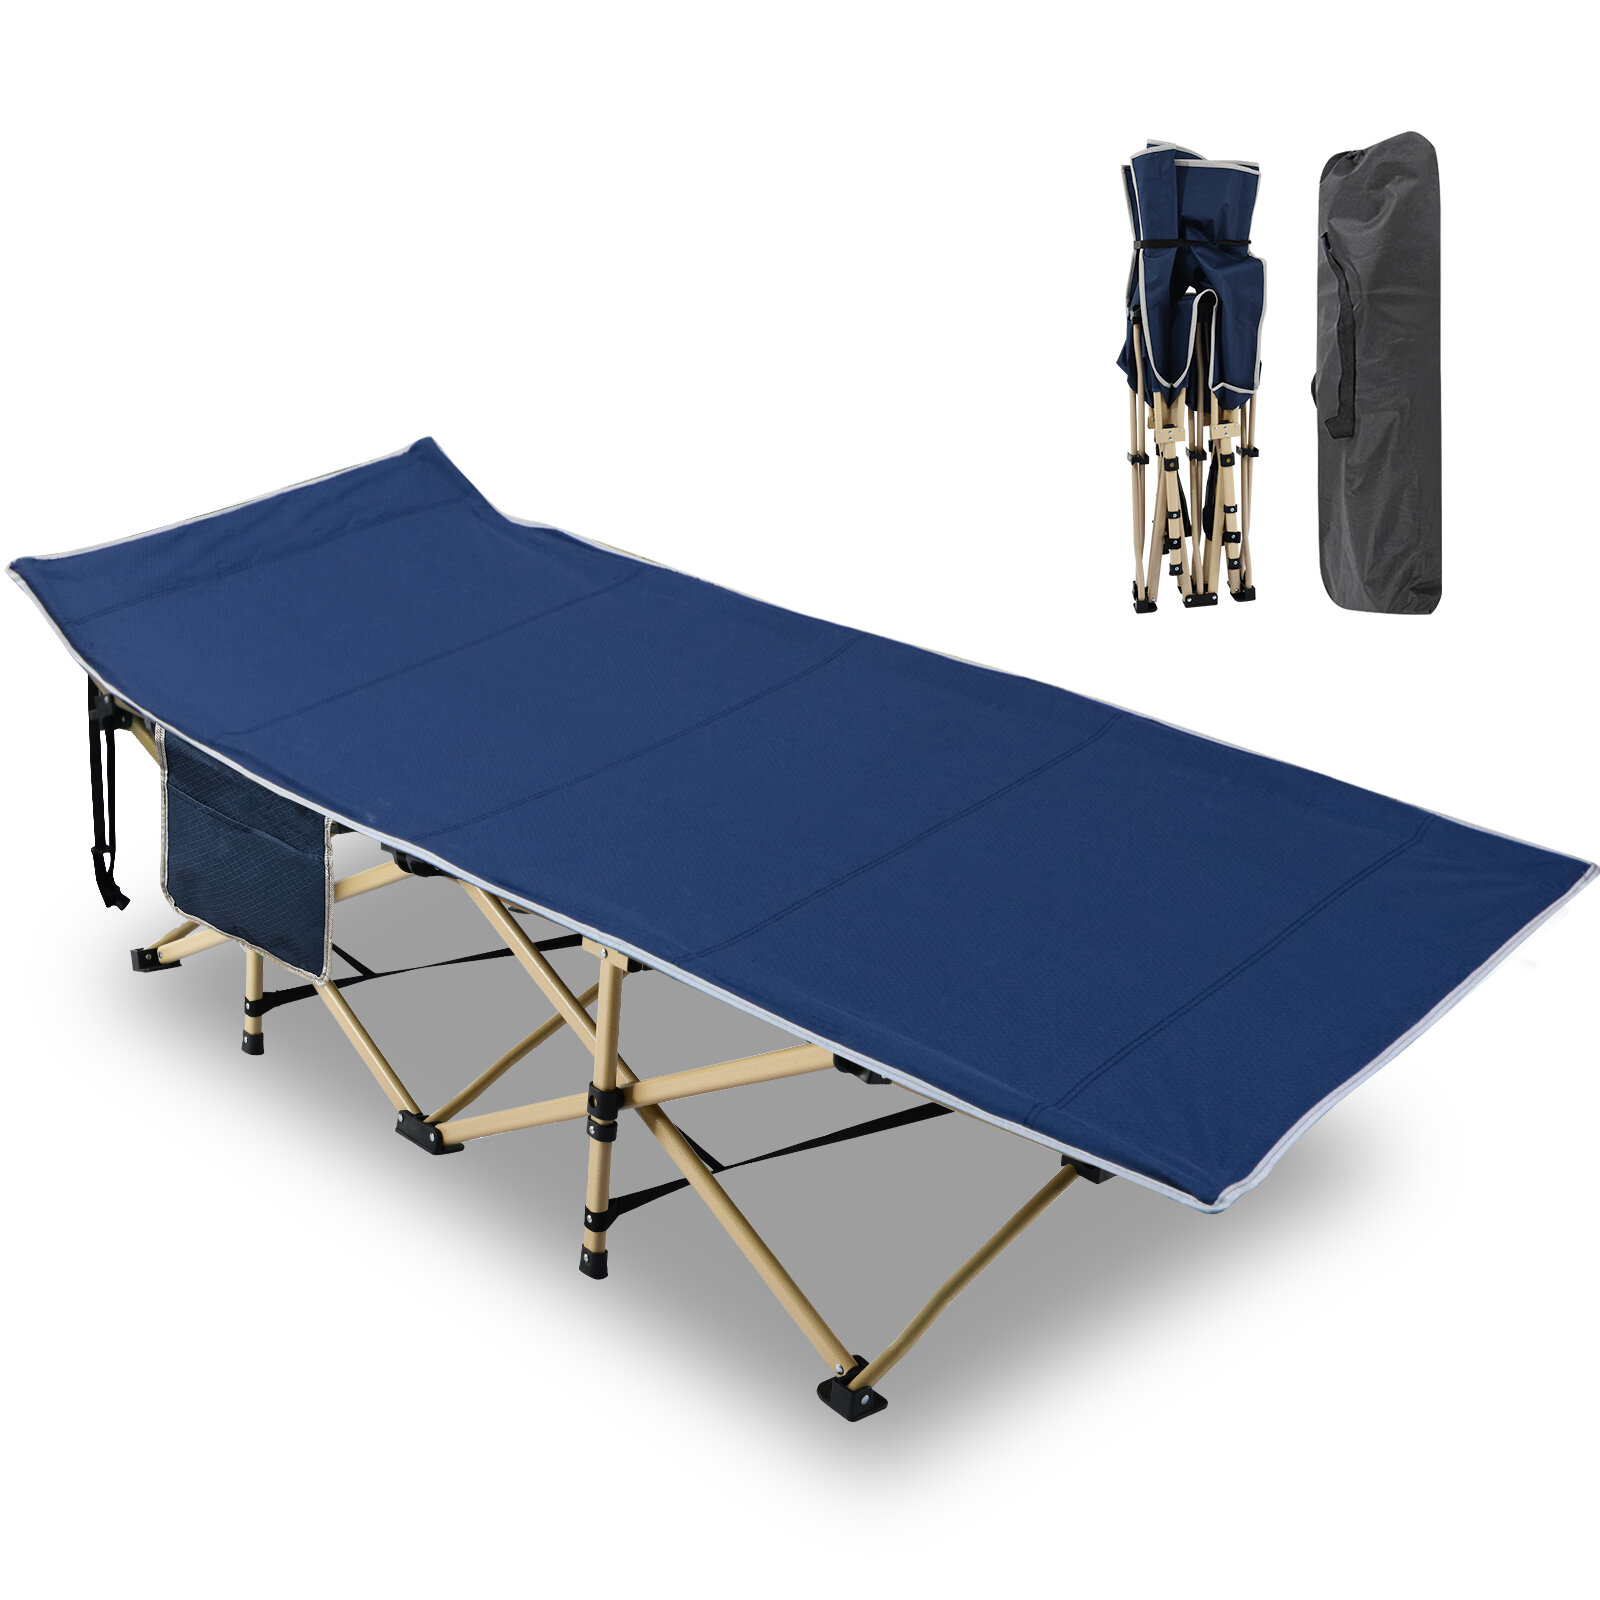 Great for Hunting Military cots Travel cots and Folding Cots Keeps Your Sleeping Pad Secure! Fitted Camping Cot Sheet for Adult Sleeping Cots Camping Bedding That fits Most Army cots 